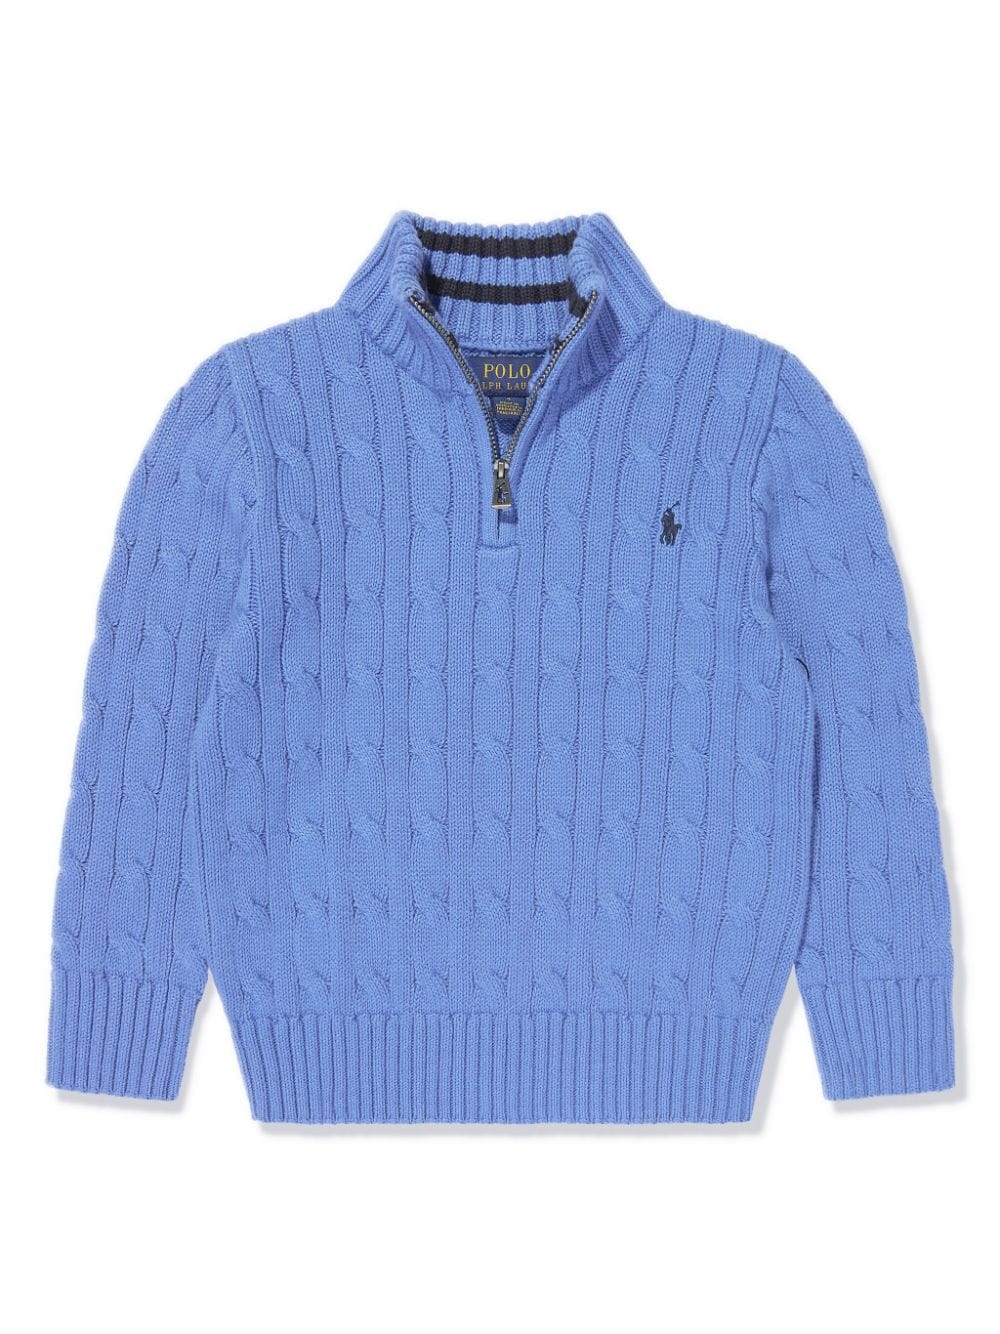 Cable-knit cotton jumper<BR/><BR/><BR/>